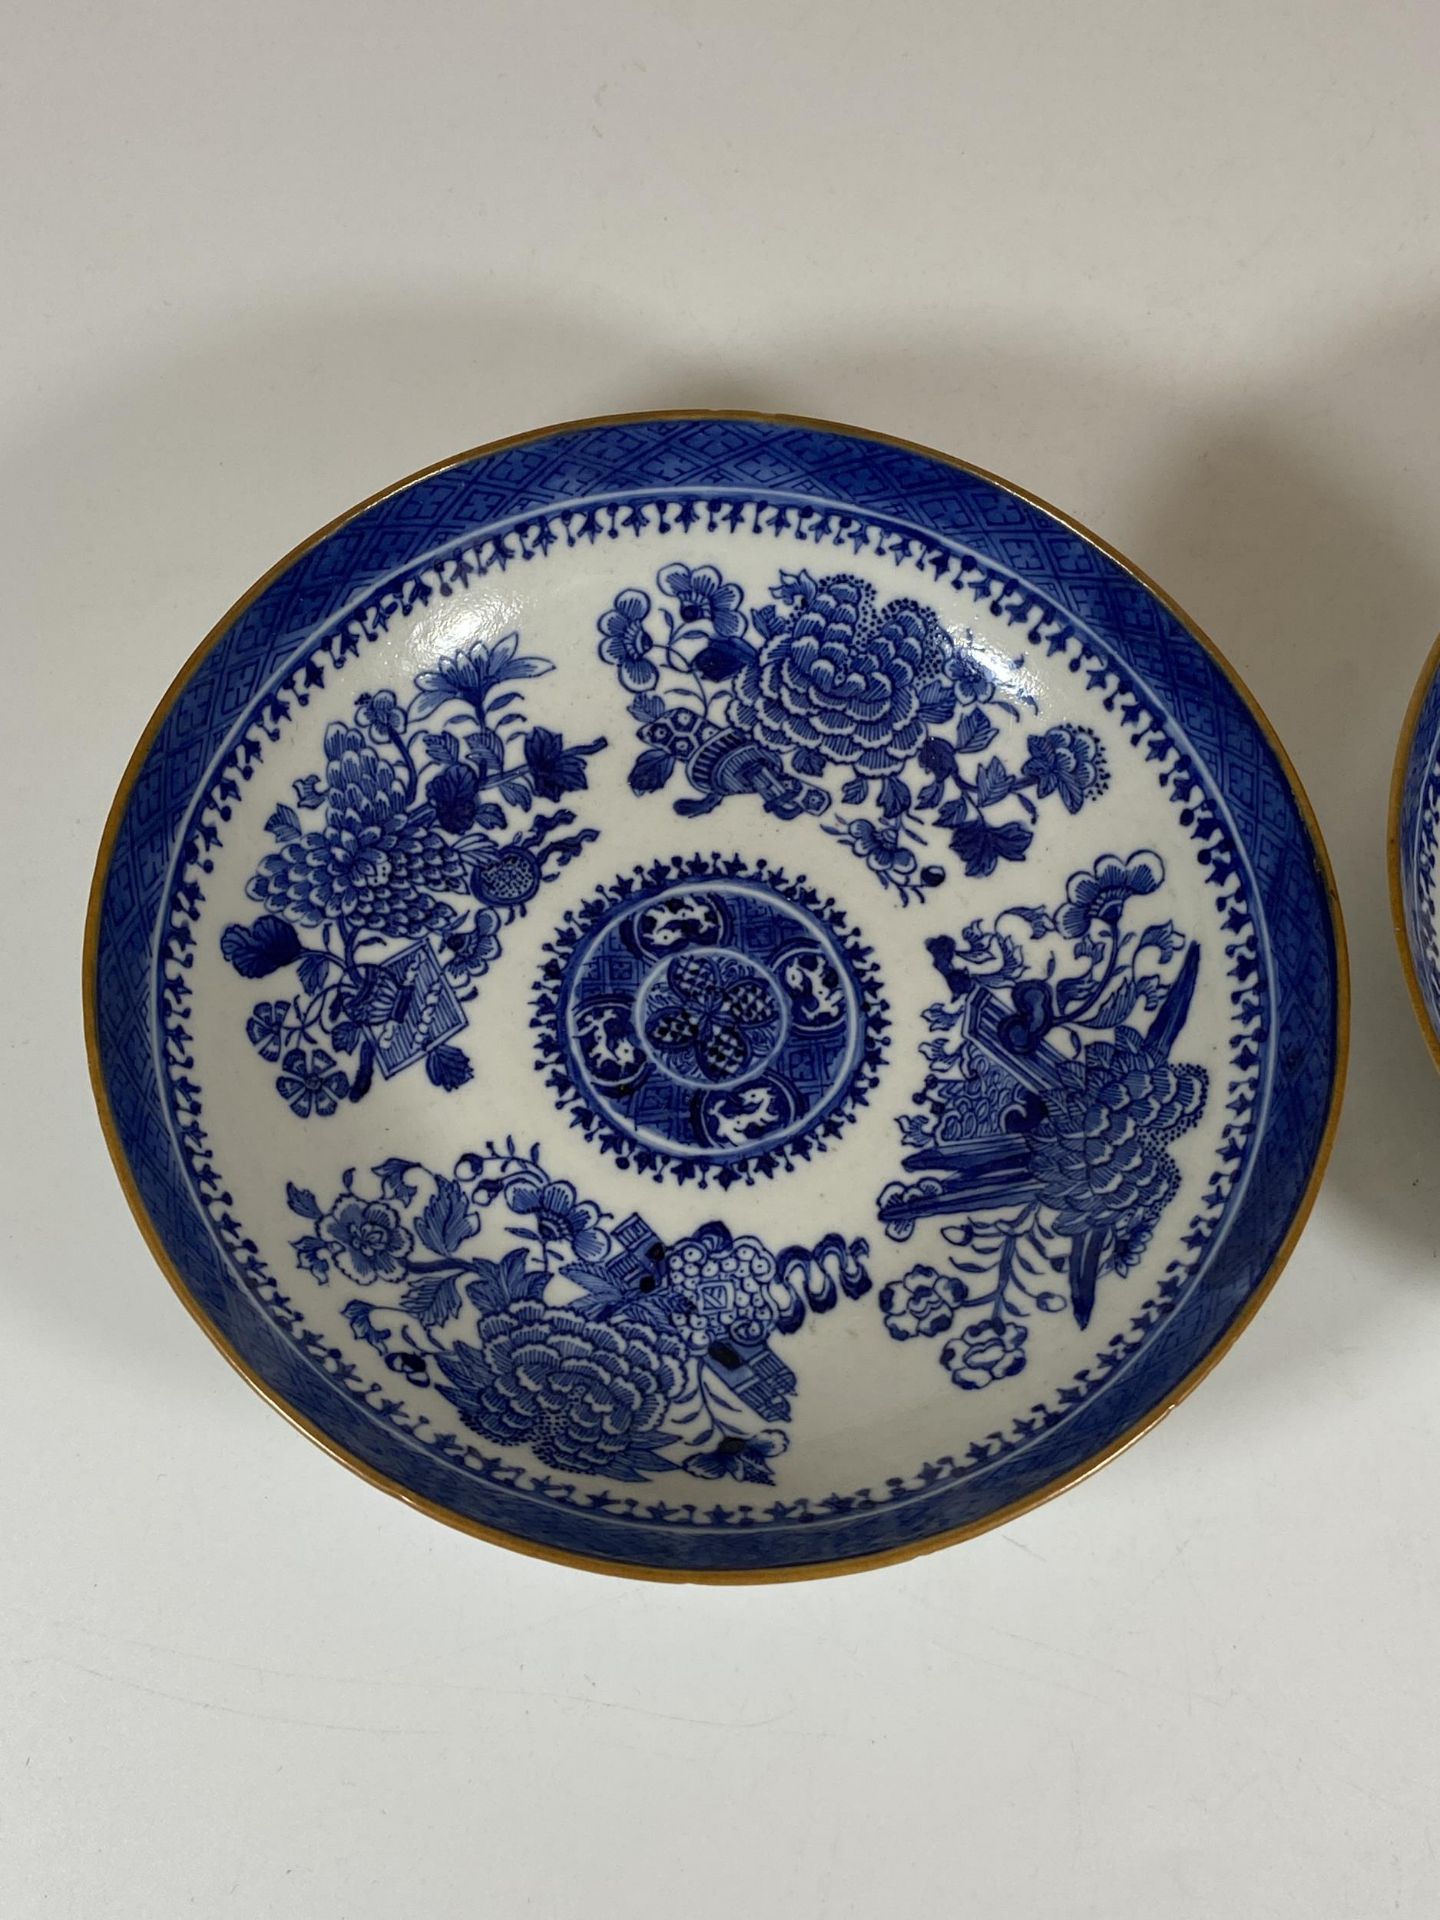 A PAIR OF 19TH CENTURY CHINESE BLUE AND WHITE PORCELAIN DISHES, DIAMETER 16CM - Image 2 of 6